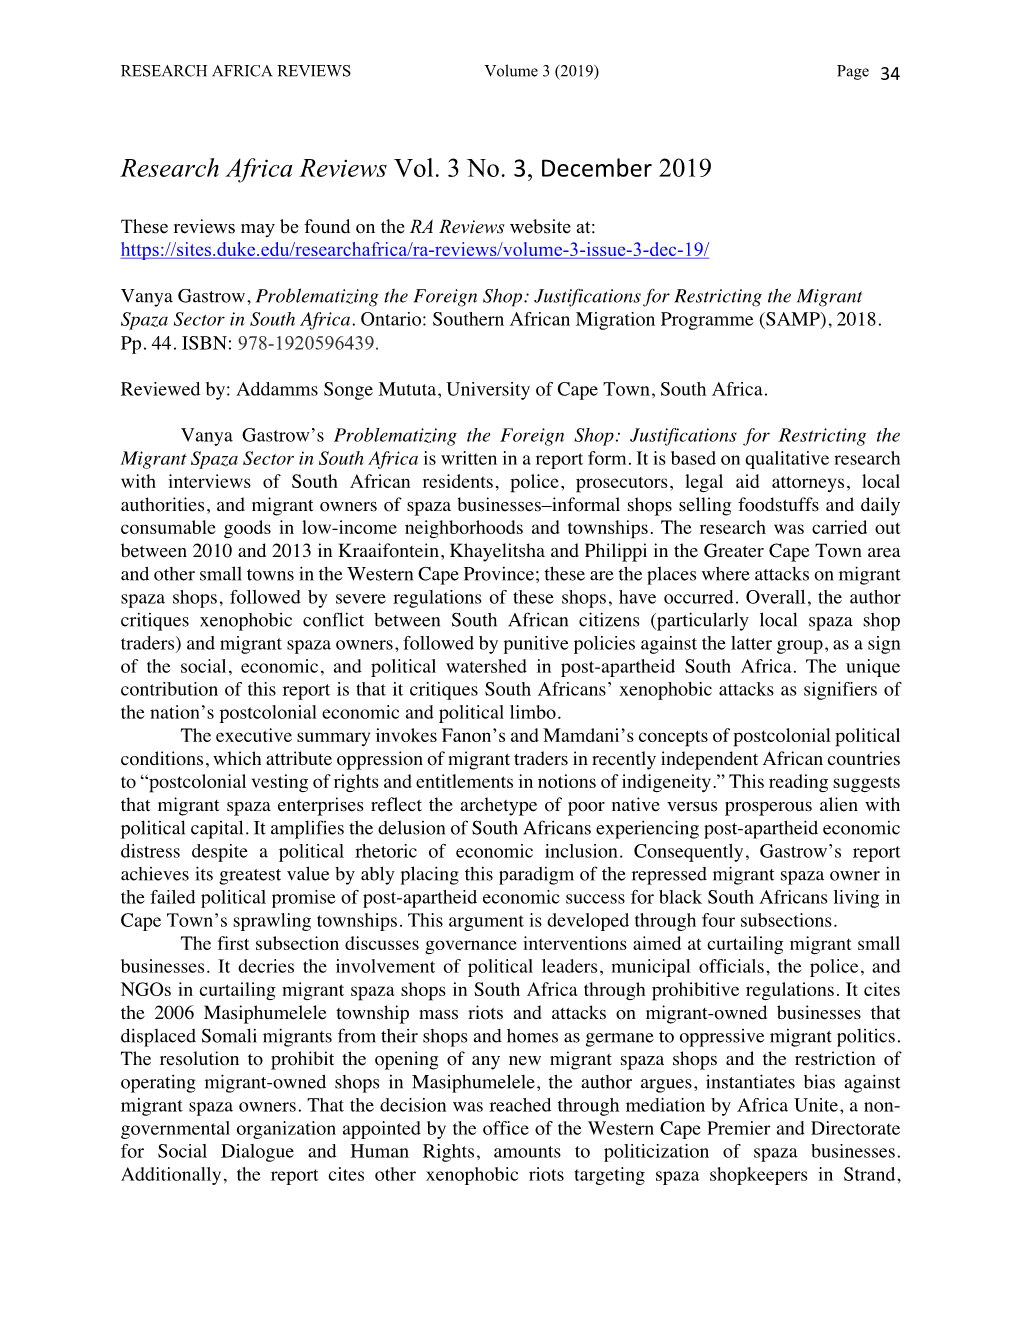 Research Africa Reviews Vol. 3 No. 3, December 2019